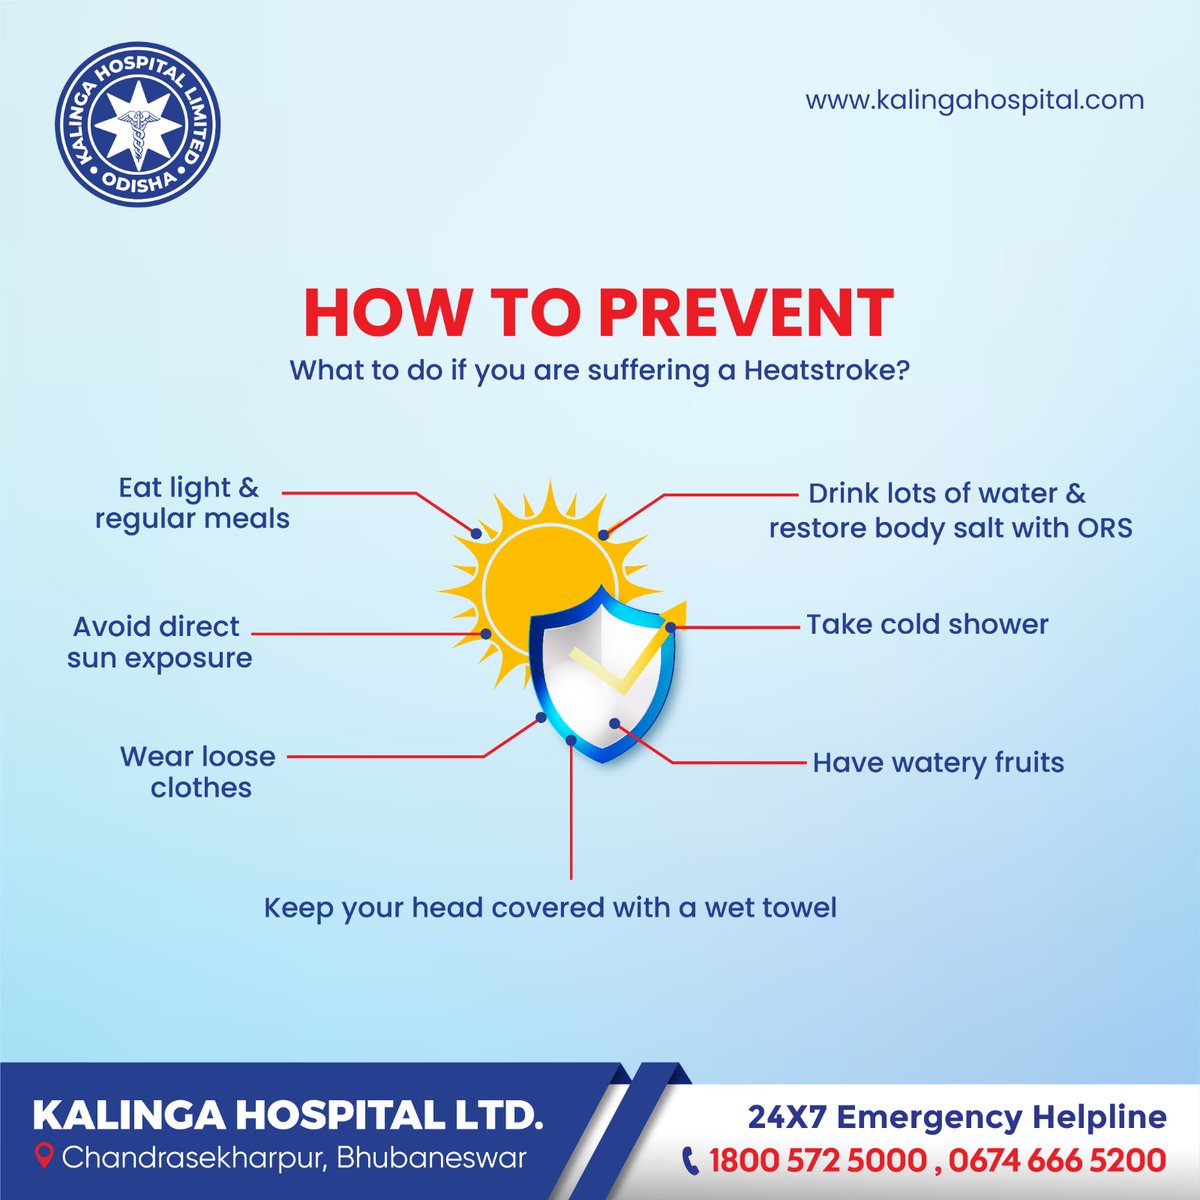 High temperatures can pose serious health risks. Be proactive and stay informed about heat advisories in your area. Let's beat the heat and stay safe together! 

#HeatWave #StayHydrated #BeatTheHeat #HeatWaveAwareness #Bhubaneswar #KHL #KalingaHospital